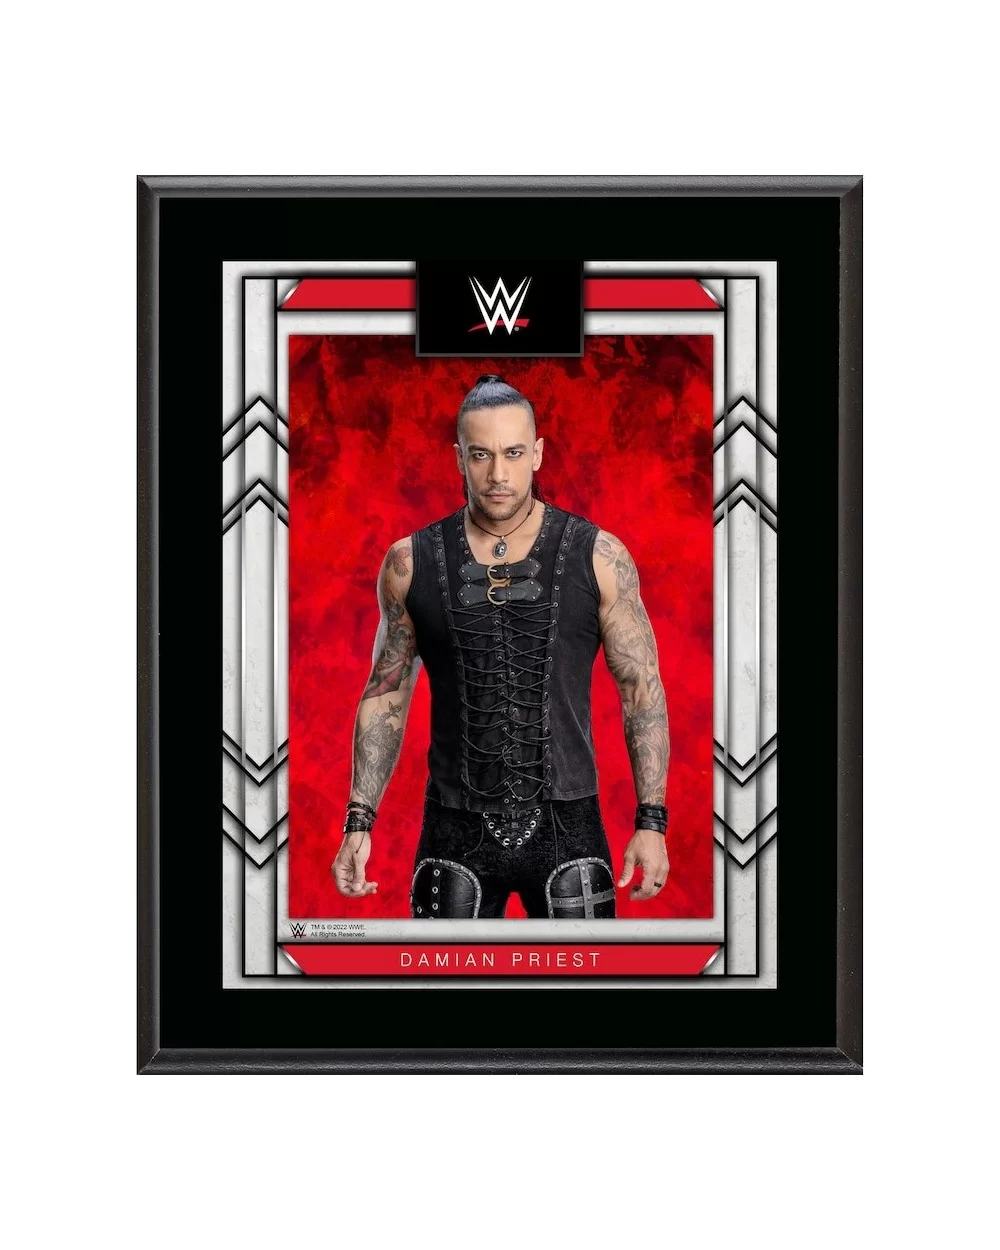 Damian Priest 10.5" x 13" Sublimated Plaque $8.16 Home & Office